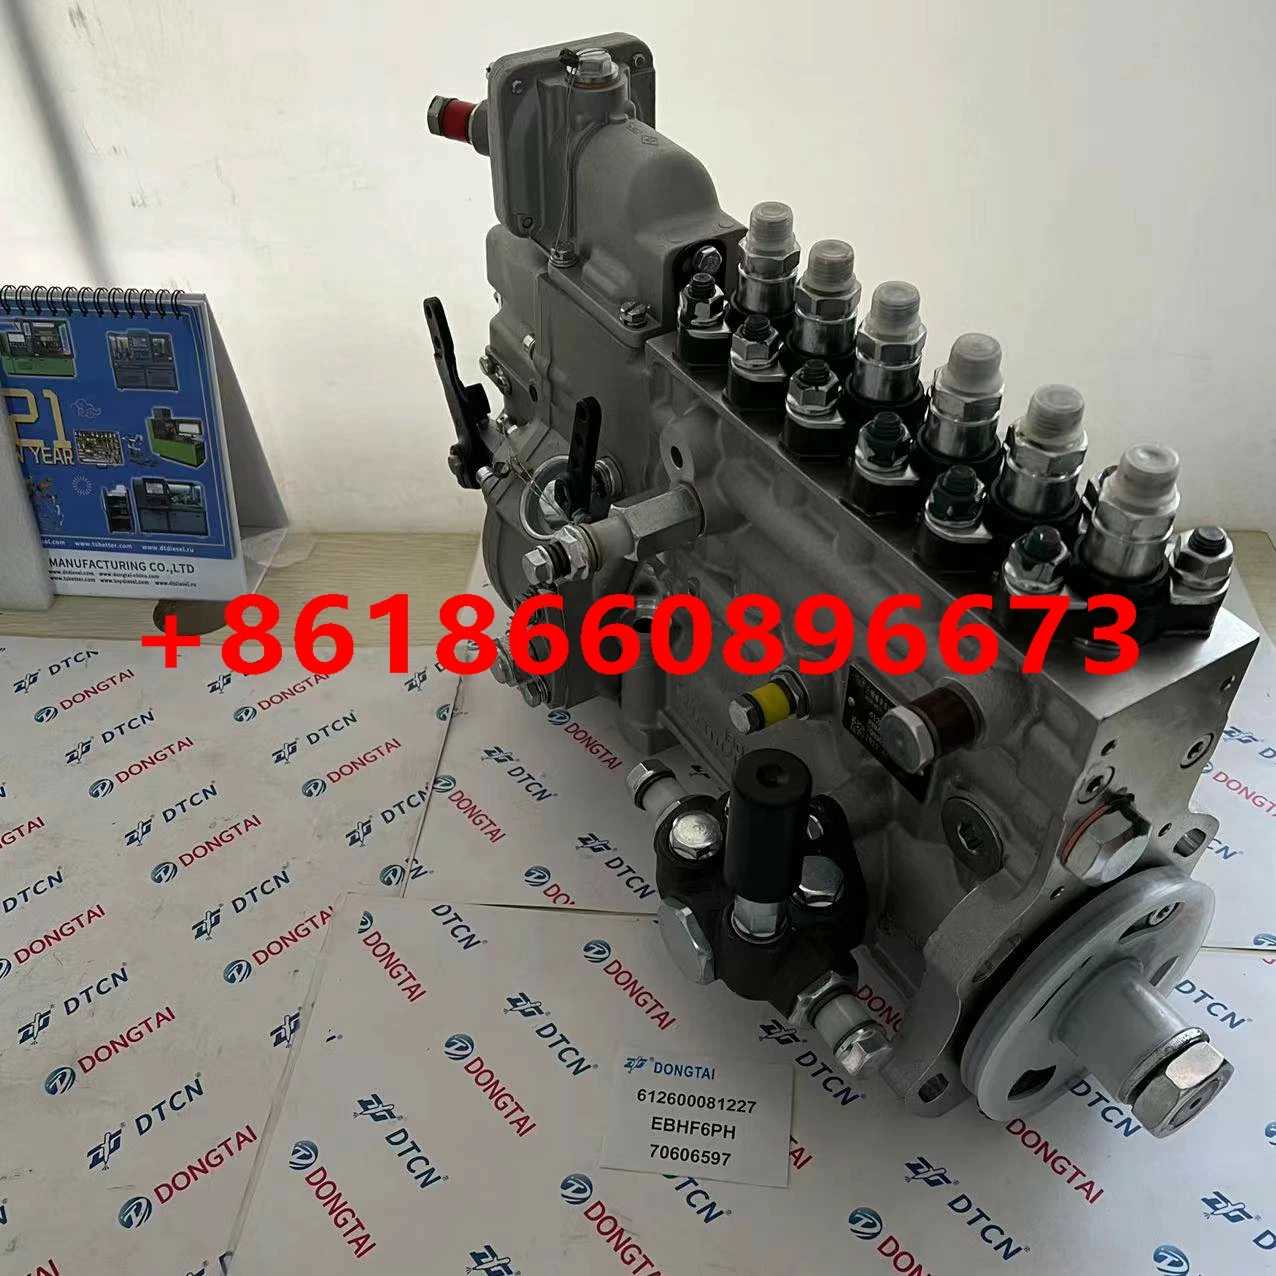 Fuel Injection Pump 612600081227,EBHF6PH FOR WEICHAI WD12| Alibaba.com